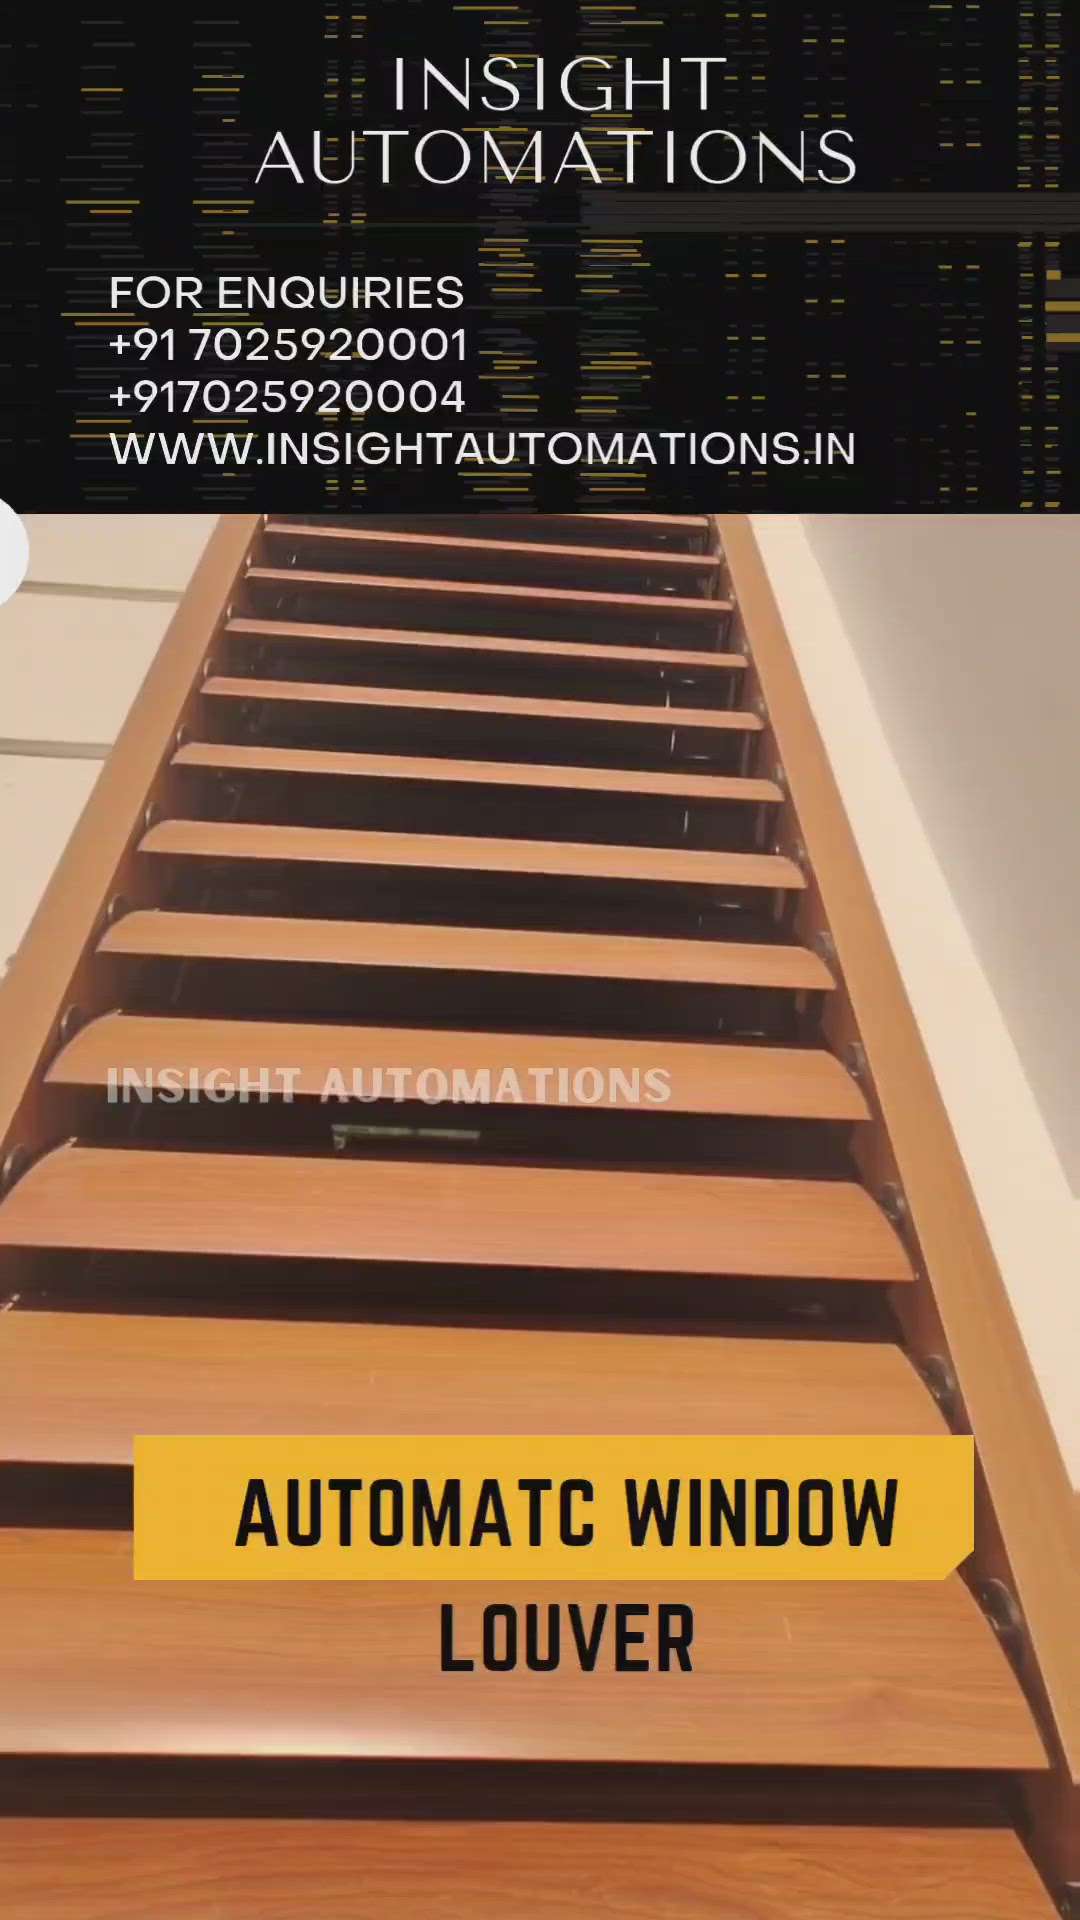 Automatic Louver Window by Insight Automations #louverwindow
#wimdows #smartwindows